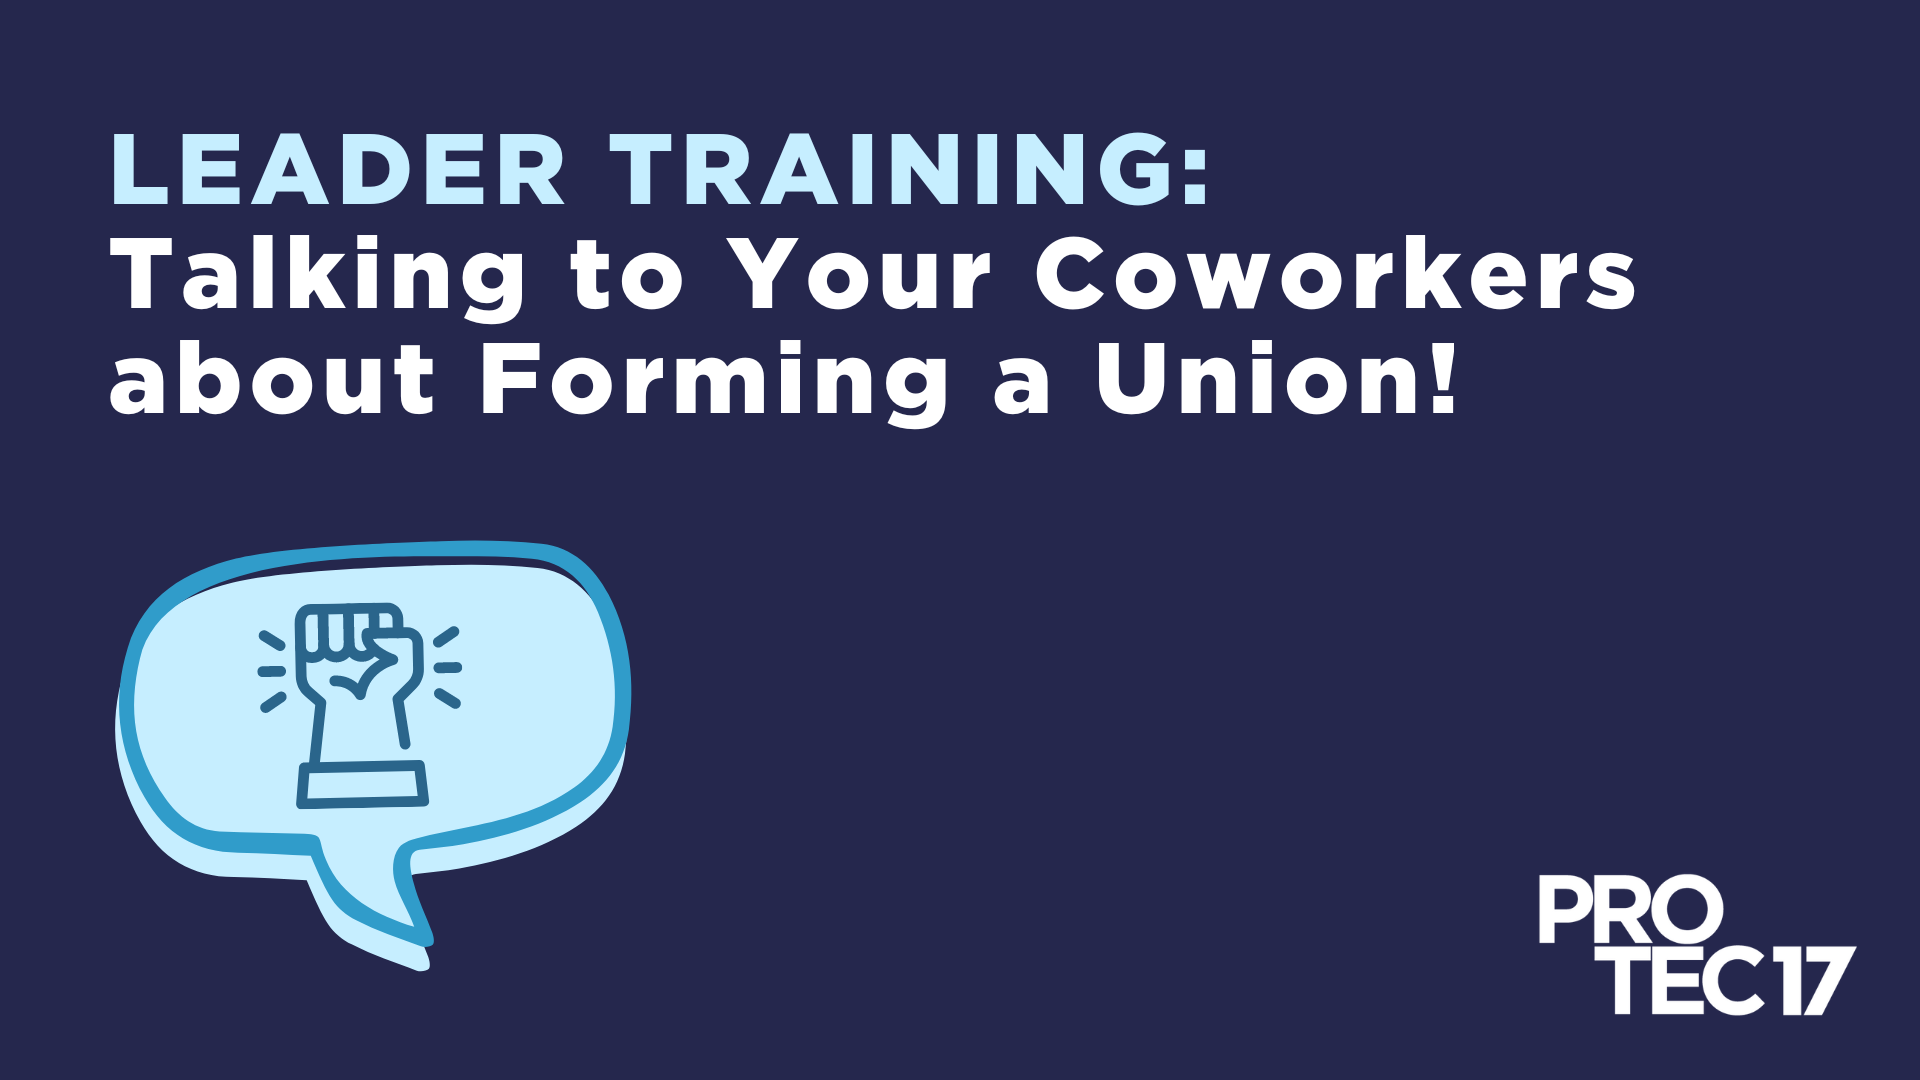 On a dark blue background, capitalized, light blue words read, "LEADER TRAINING:" followed by white text that reads, "Talking to Your Coworkers about Forming a Union!" There is a graphic that shows a line drawing of a chat bubble over a filled chat bubble graphic. There is a solidarity fist raised, with emphasis marks within the bubble. The PROTEC17 logo is in the bottom right.